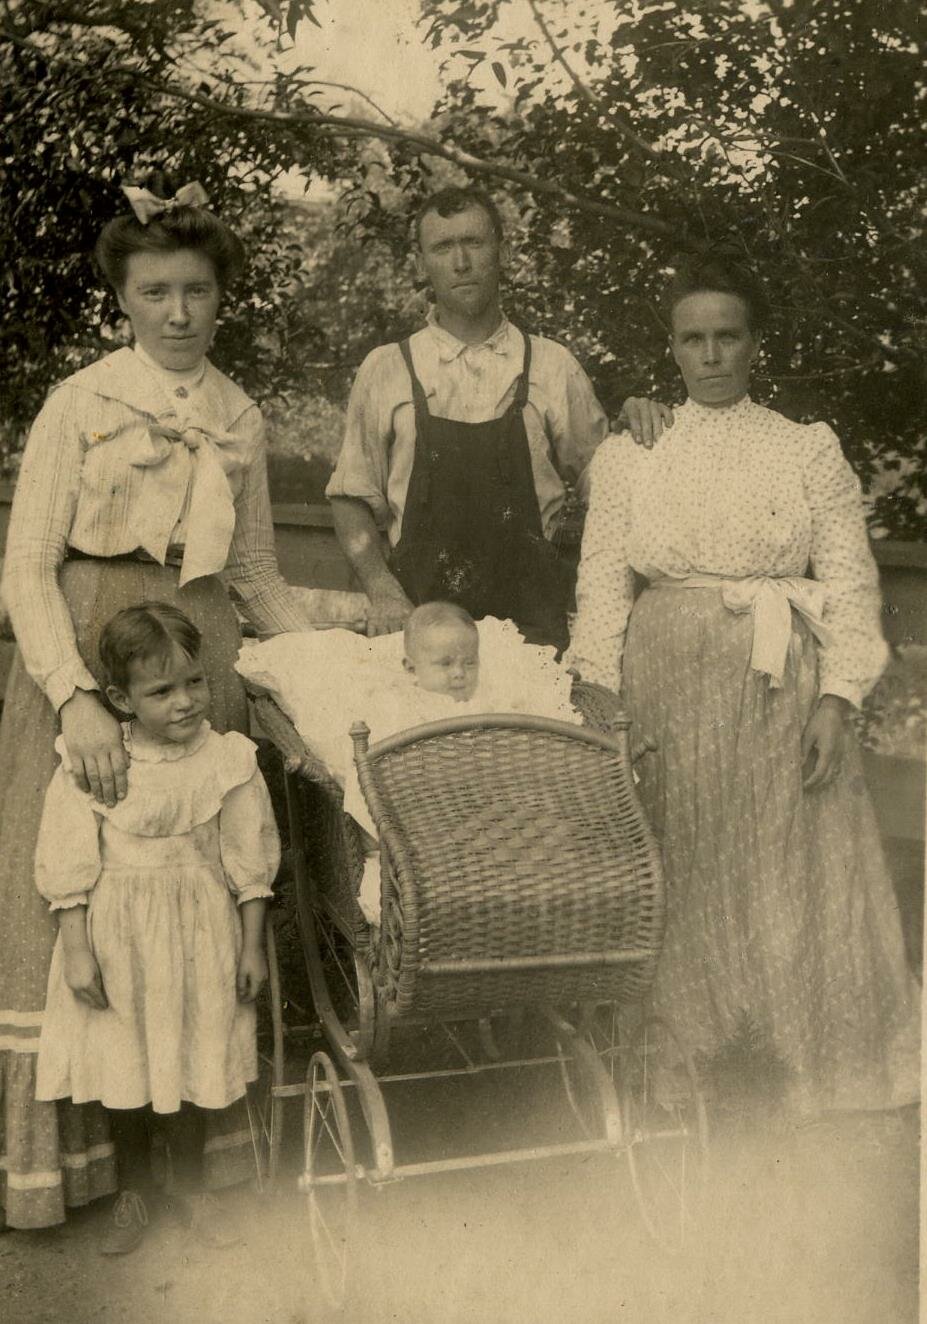 The Patrick Barry family with friend Ann Ahearn. From Left, child Margaret Barry, Ann Ahearn, Patrick Barry, Mary Barry, baby Cornelius Barry.  